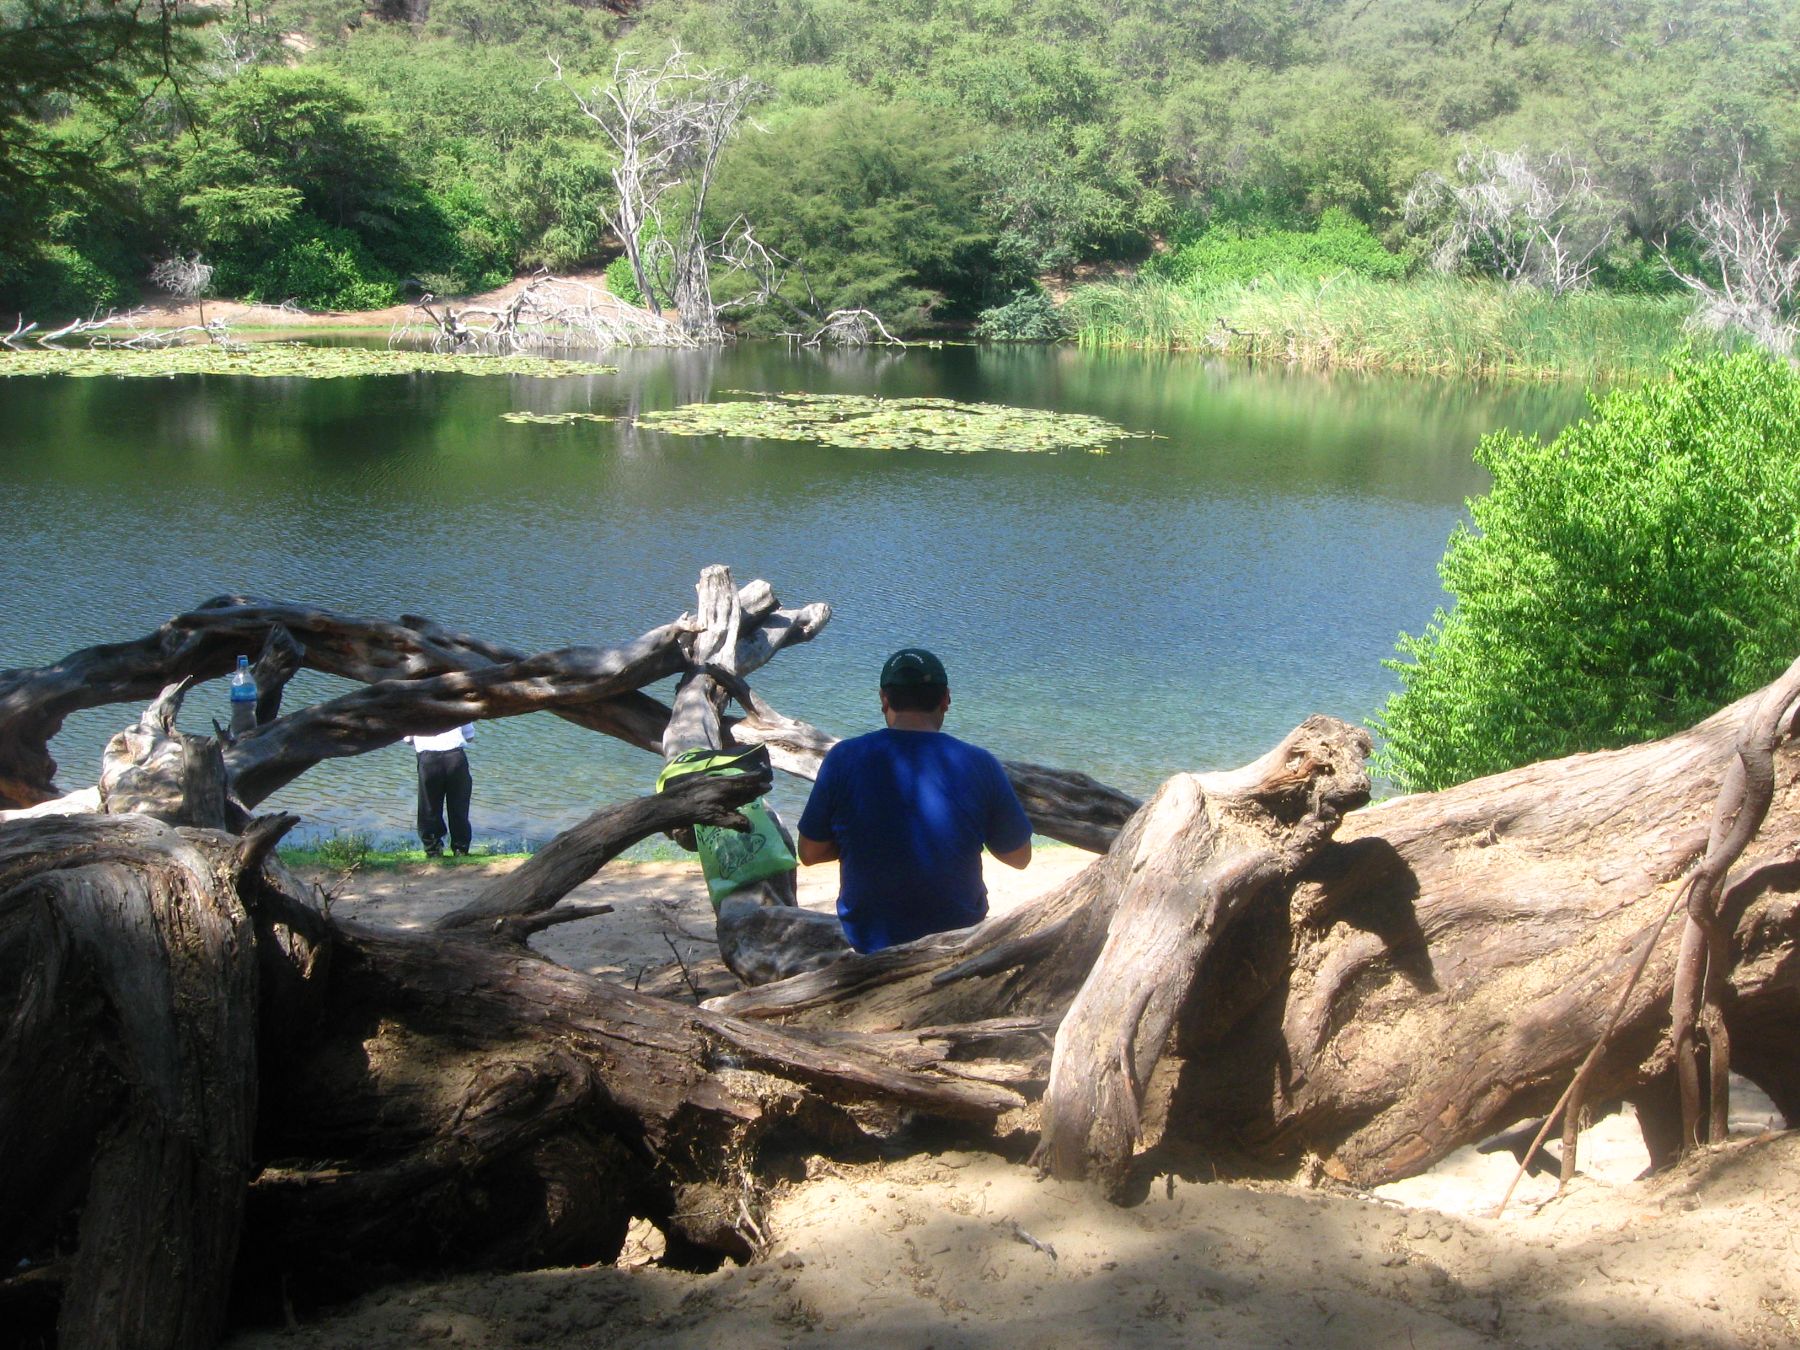 Cañoncillo Forest, conservation area located in the province of Pacasmayo (La Libertad). Photo: ANDINA / Oscar Paz.